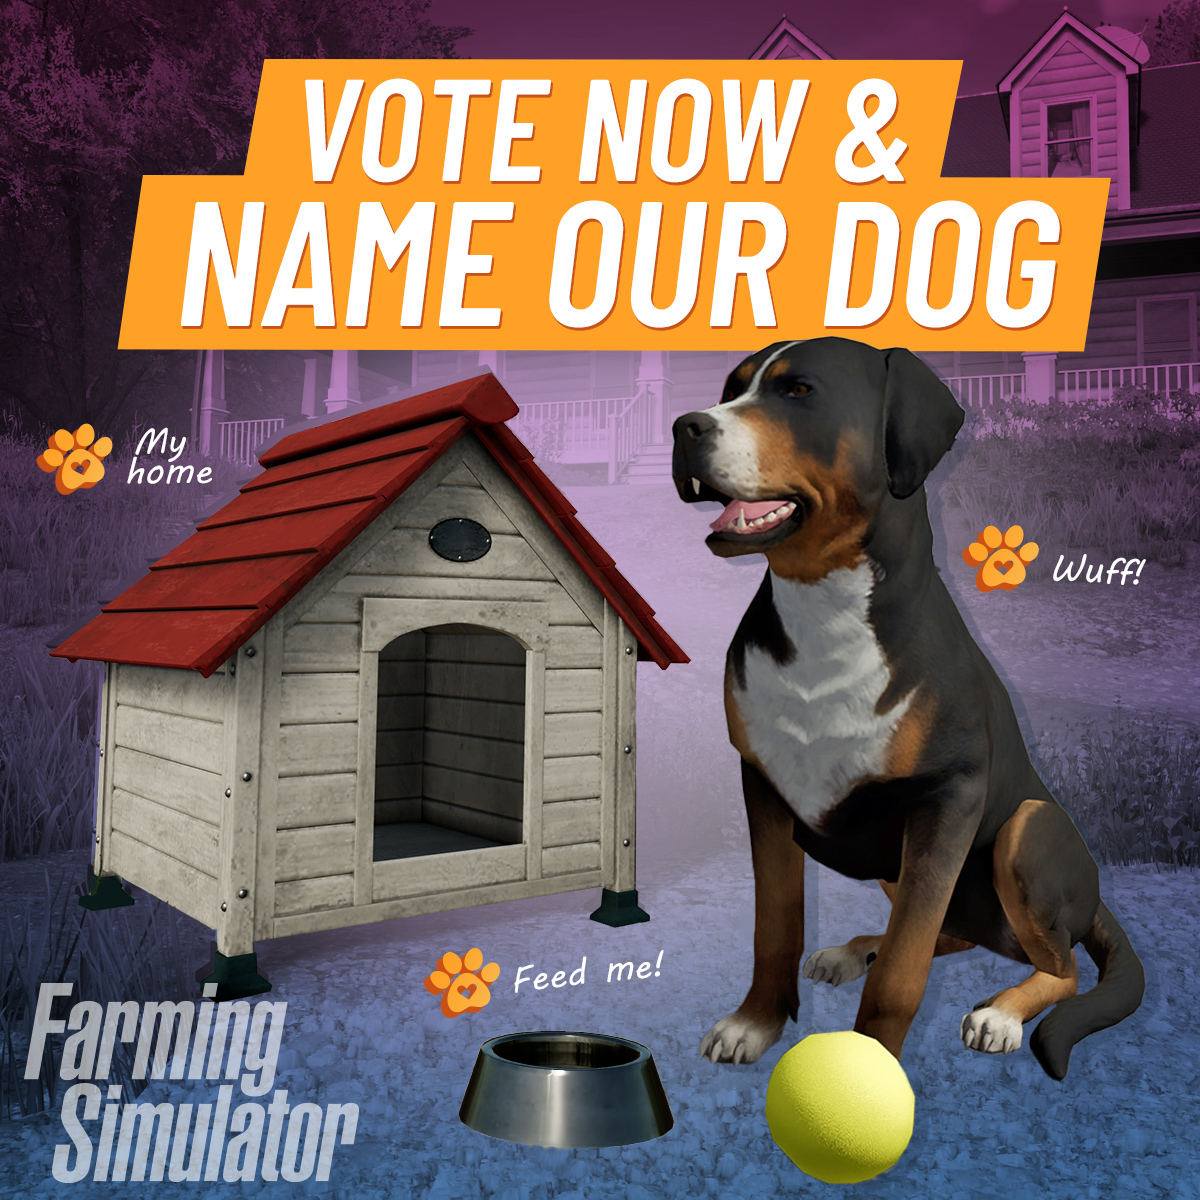 Farming Simulator on Twitter: "Our trusty farmdog needs a name for soon he  will become a plushy addition to our merchstore. 🐶 Help us and vote for a  name until sunday! 🦴